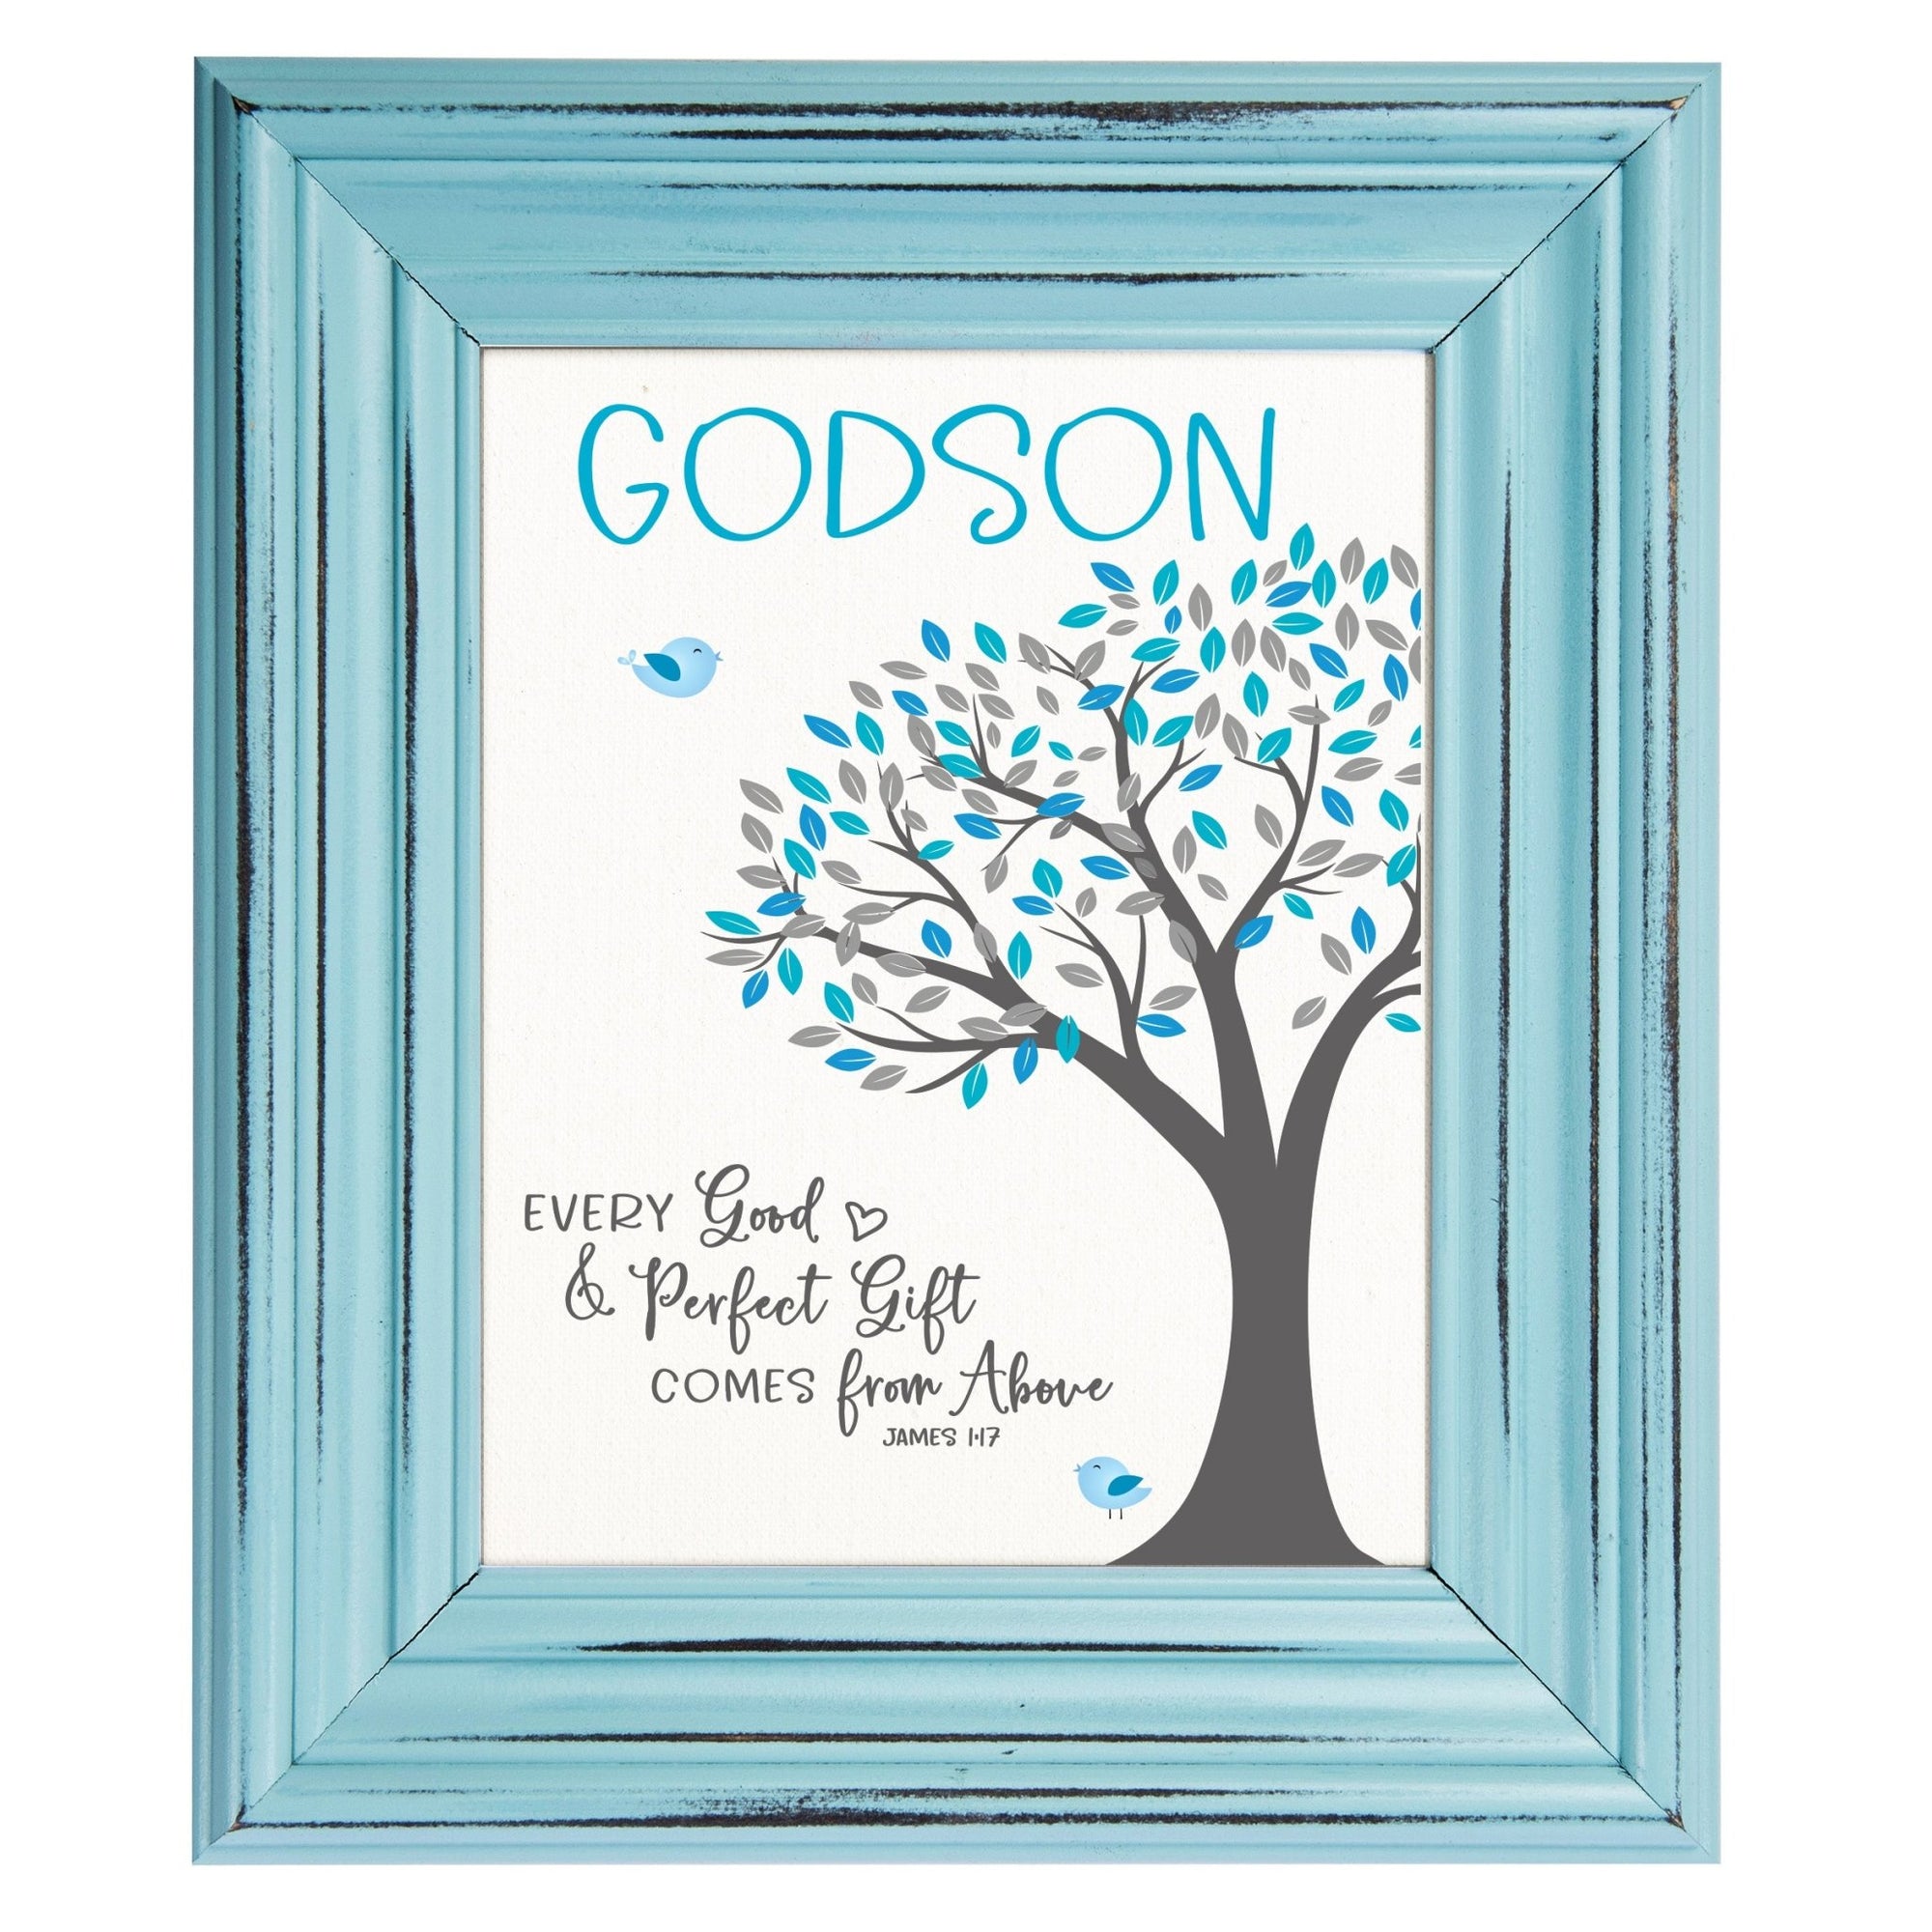 Godchild Framed Wall Signs - Every Good - LifeSong Milestones